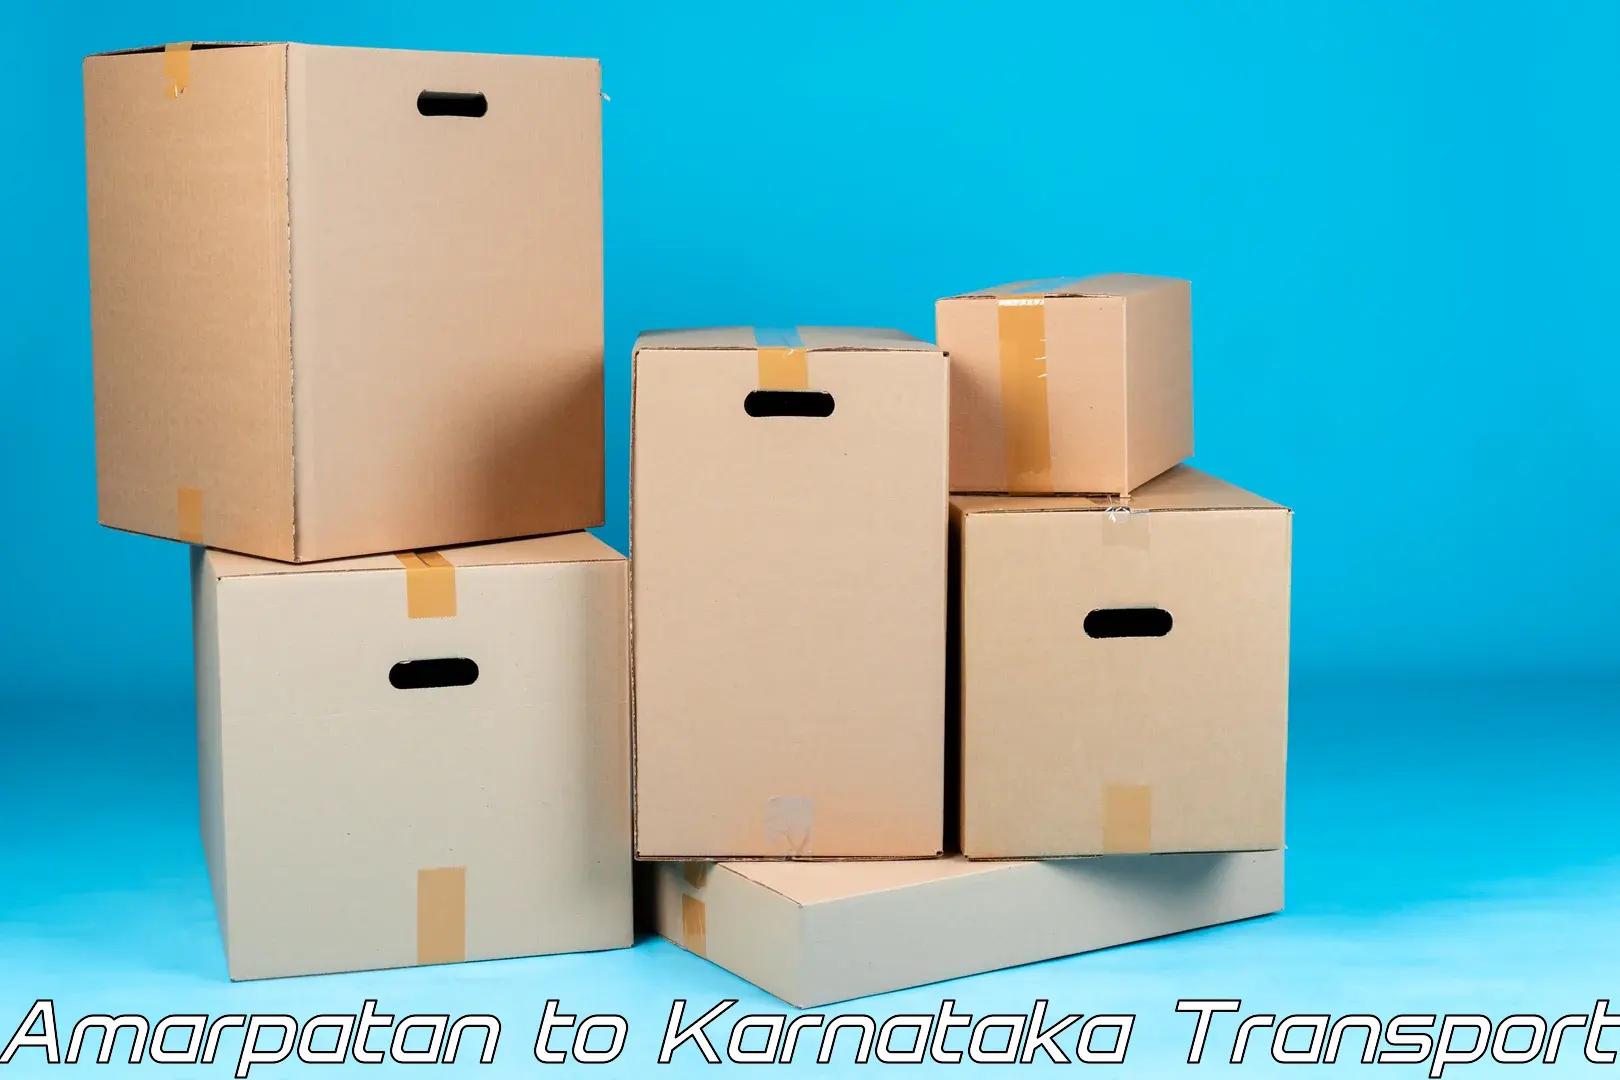 Daily parcel service transport Amarpatan to Bantwal